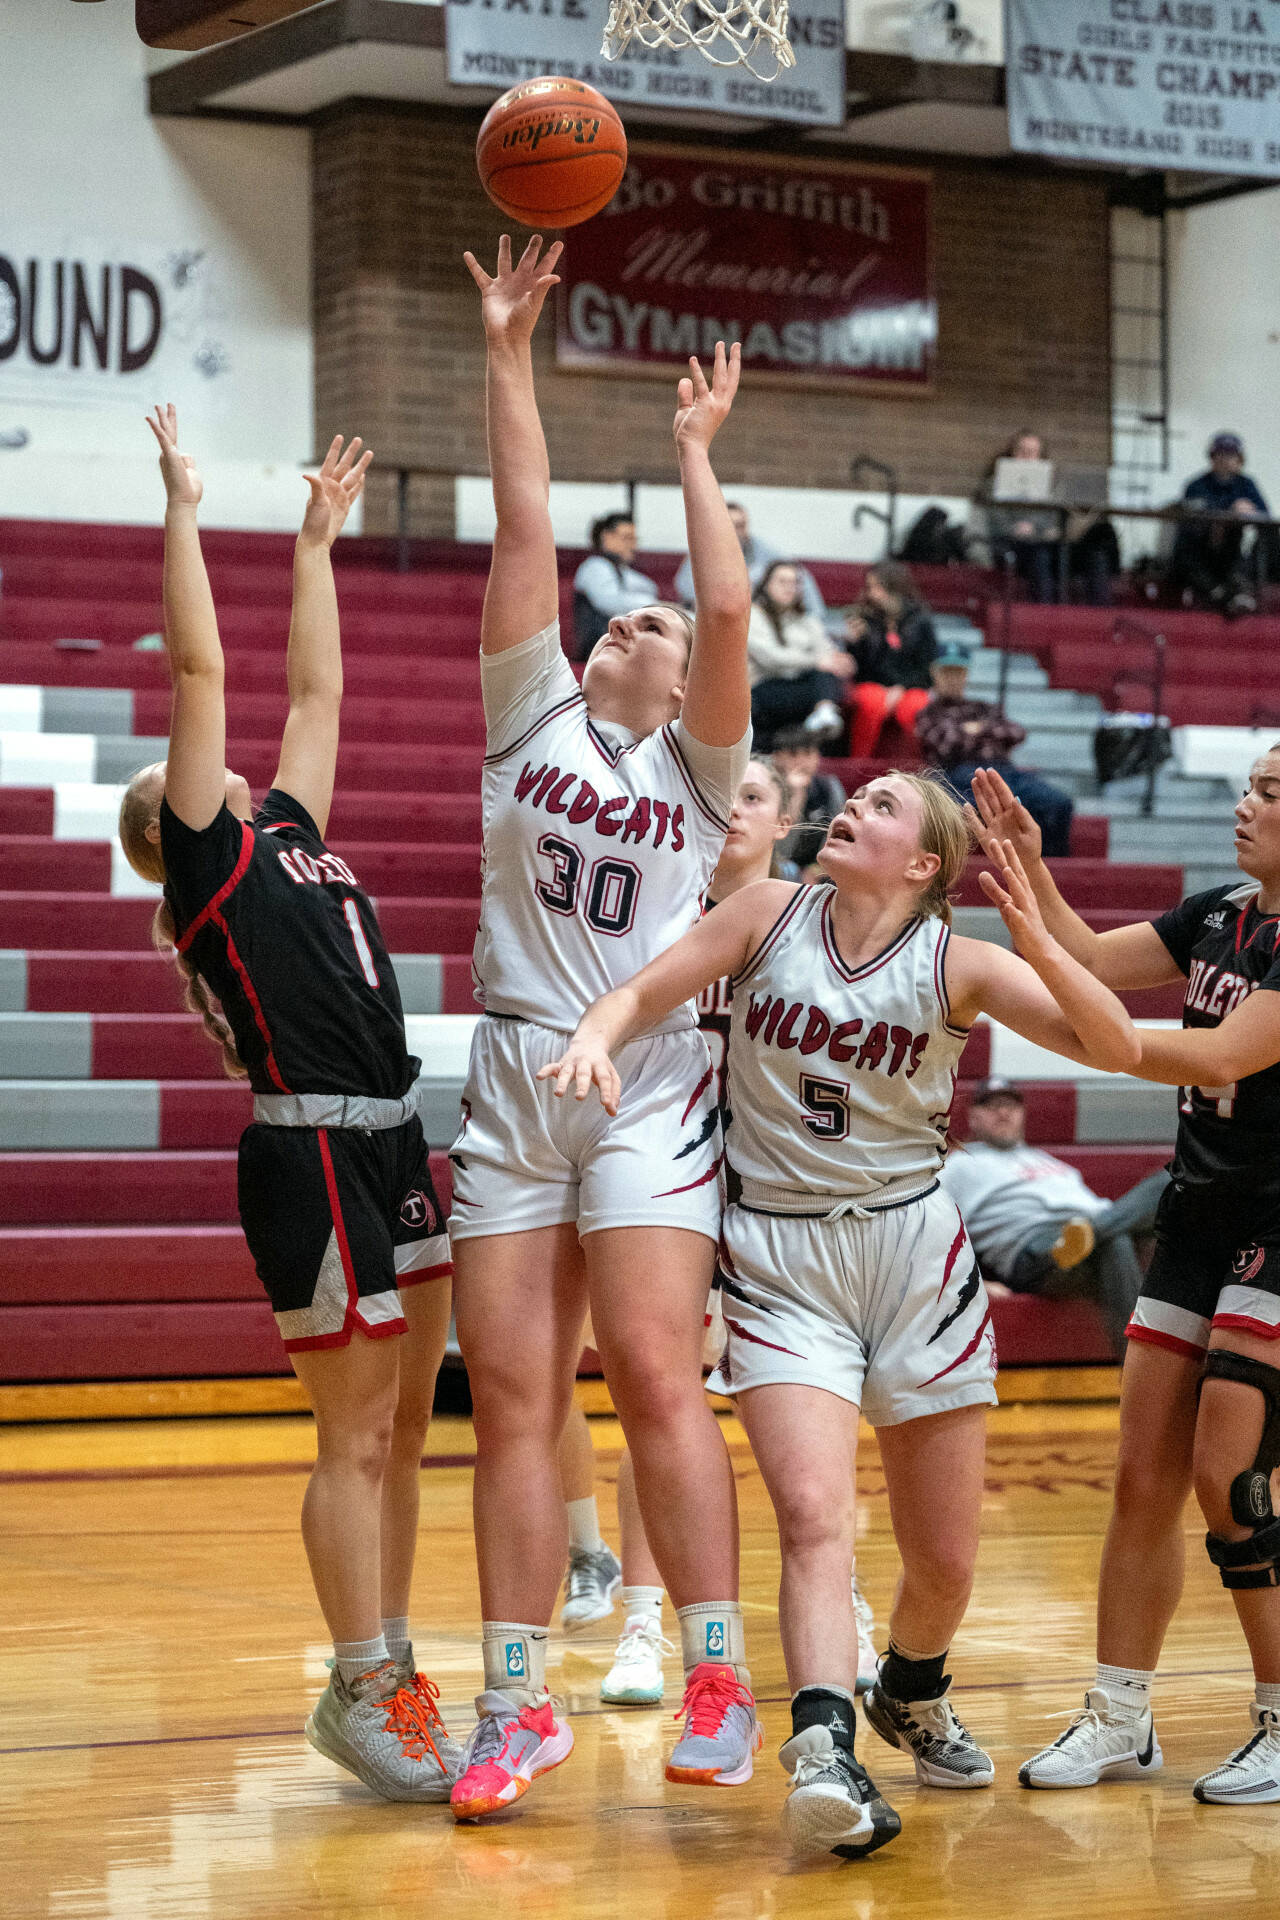 PHOTO BY FOREST WORGUM Ocosta center Alexia Bradley (30) puts up a shot while teammate Anna Davis (5) looks on during a 69-37 loss to Toledo in the first round of the 2B District 4 Tournament on Saturday in Montesano. Toledo’s Kailea Lairson (1) defends on the play.